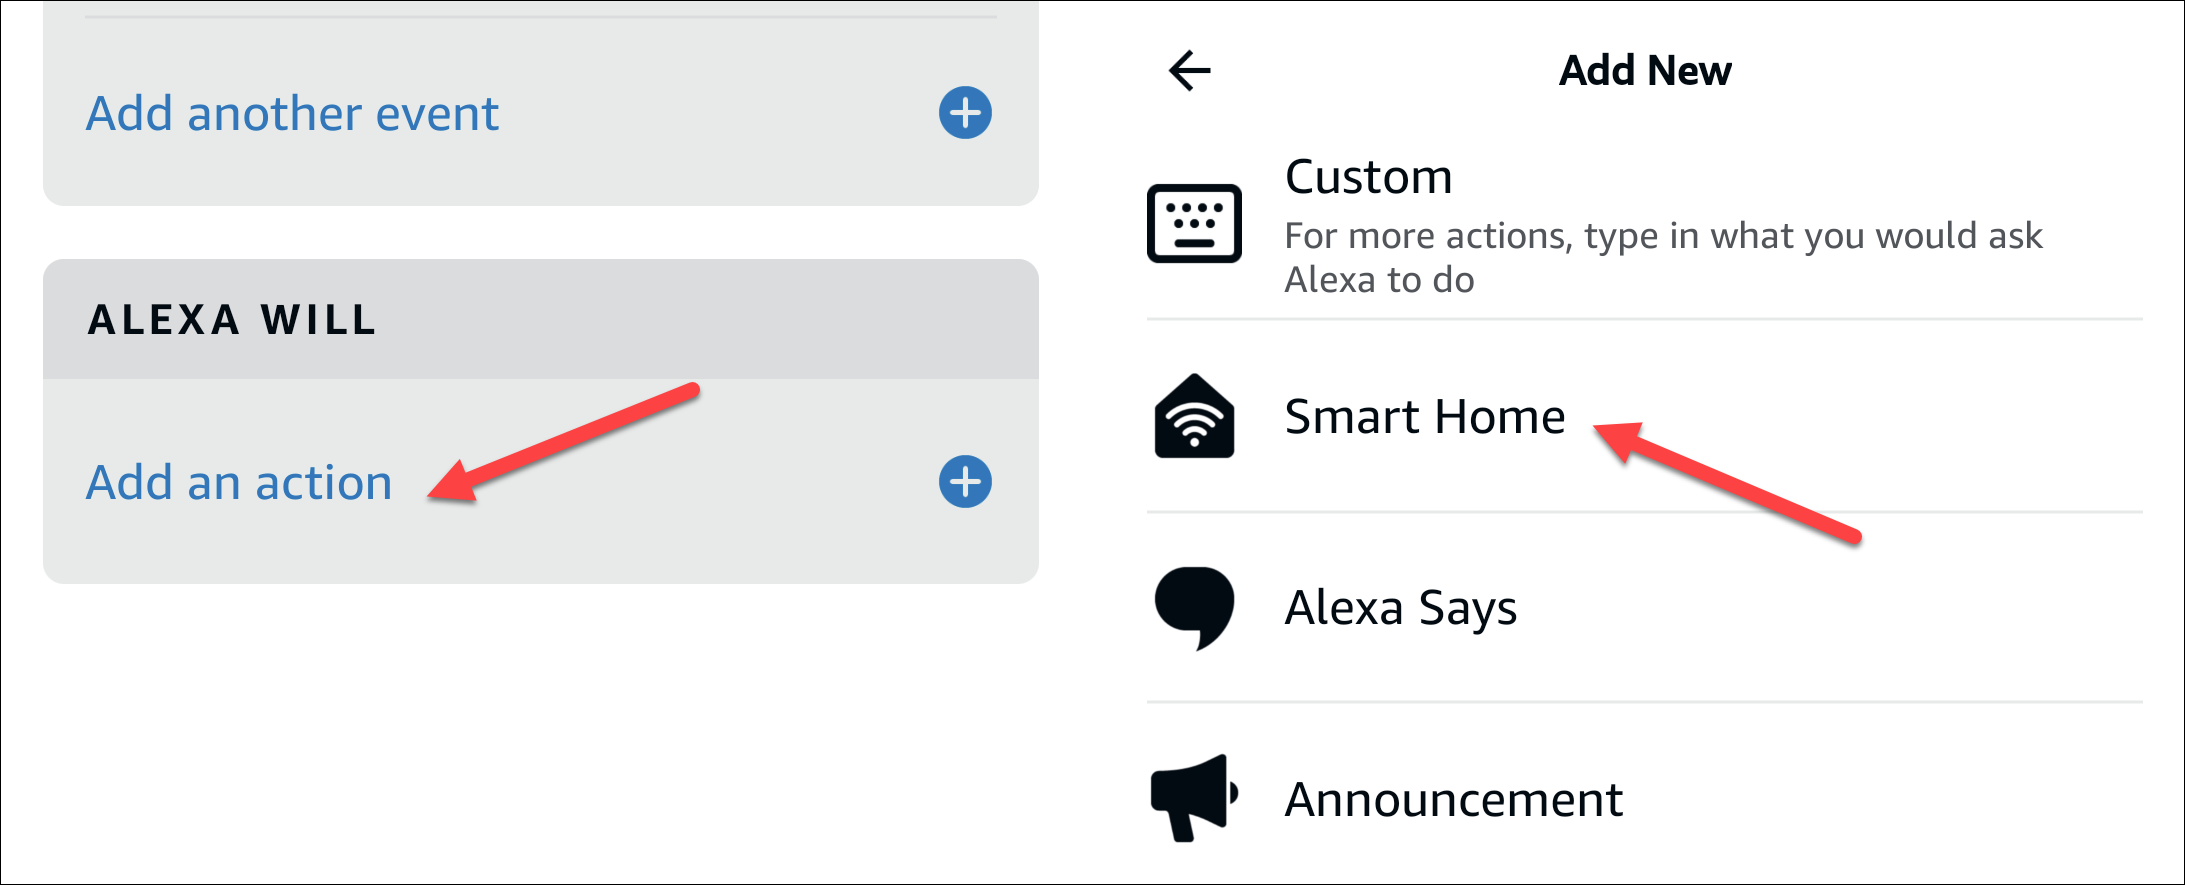 Smart Home action in Alexa routine.